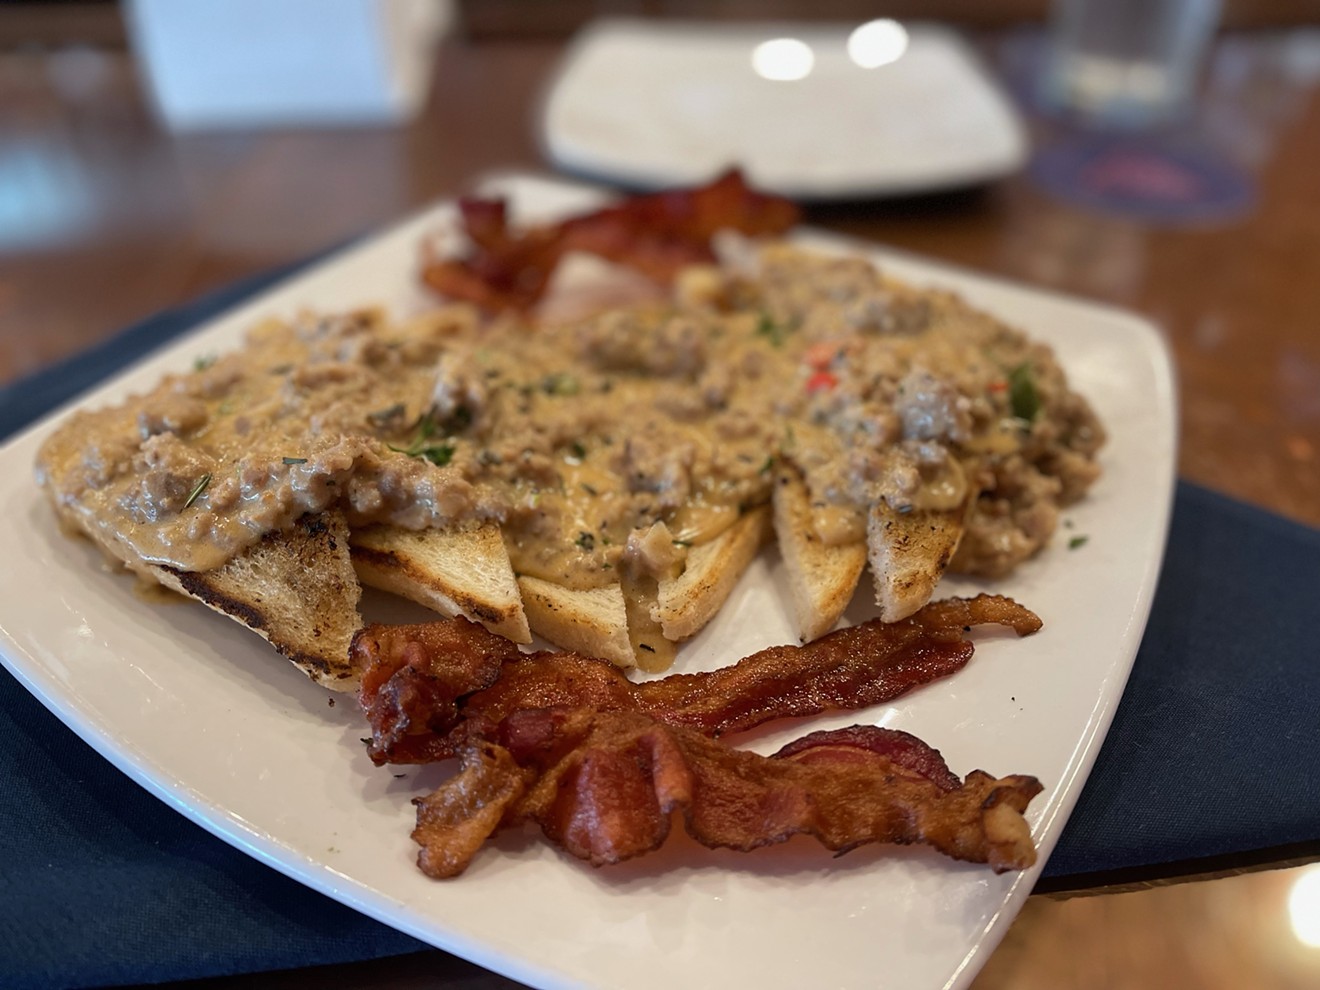 That'd be toast covered in sausage gravy with a side of bacon.